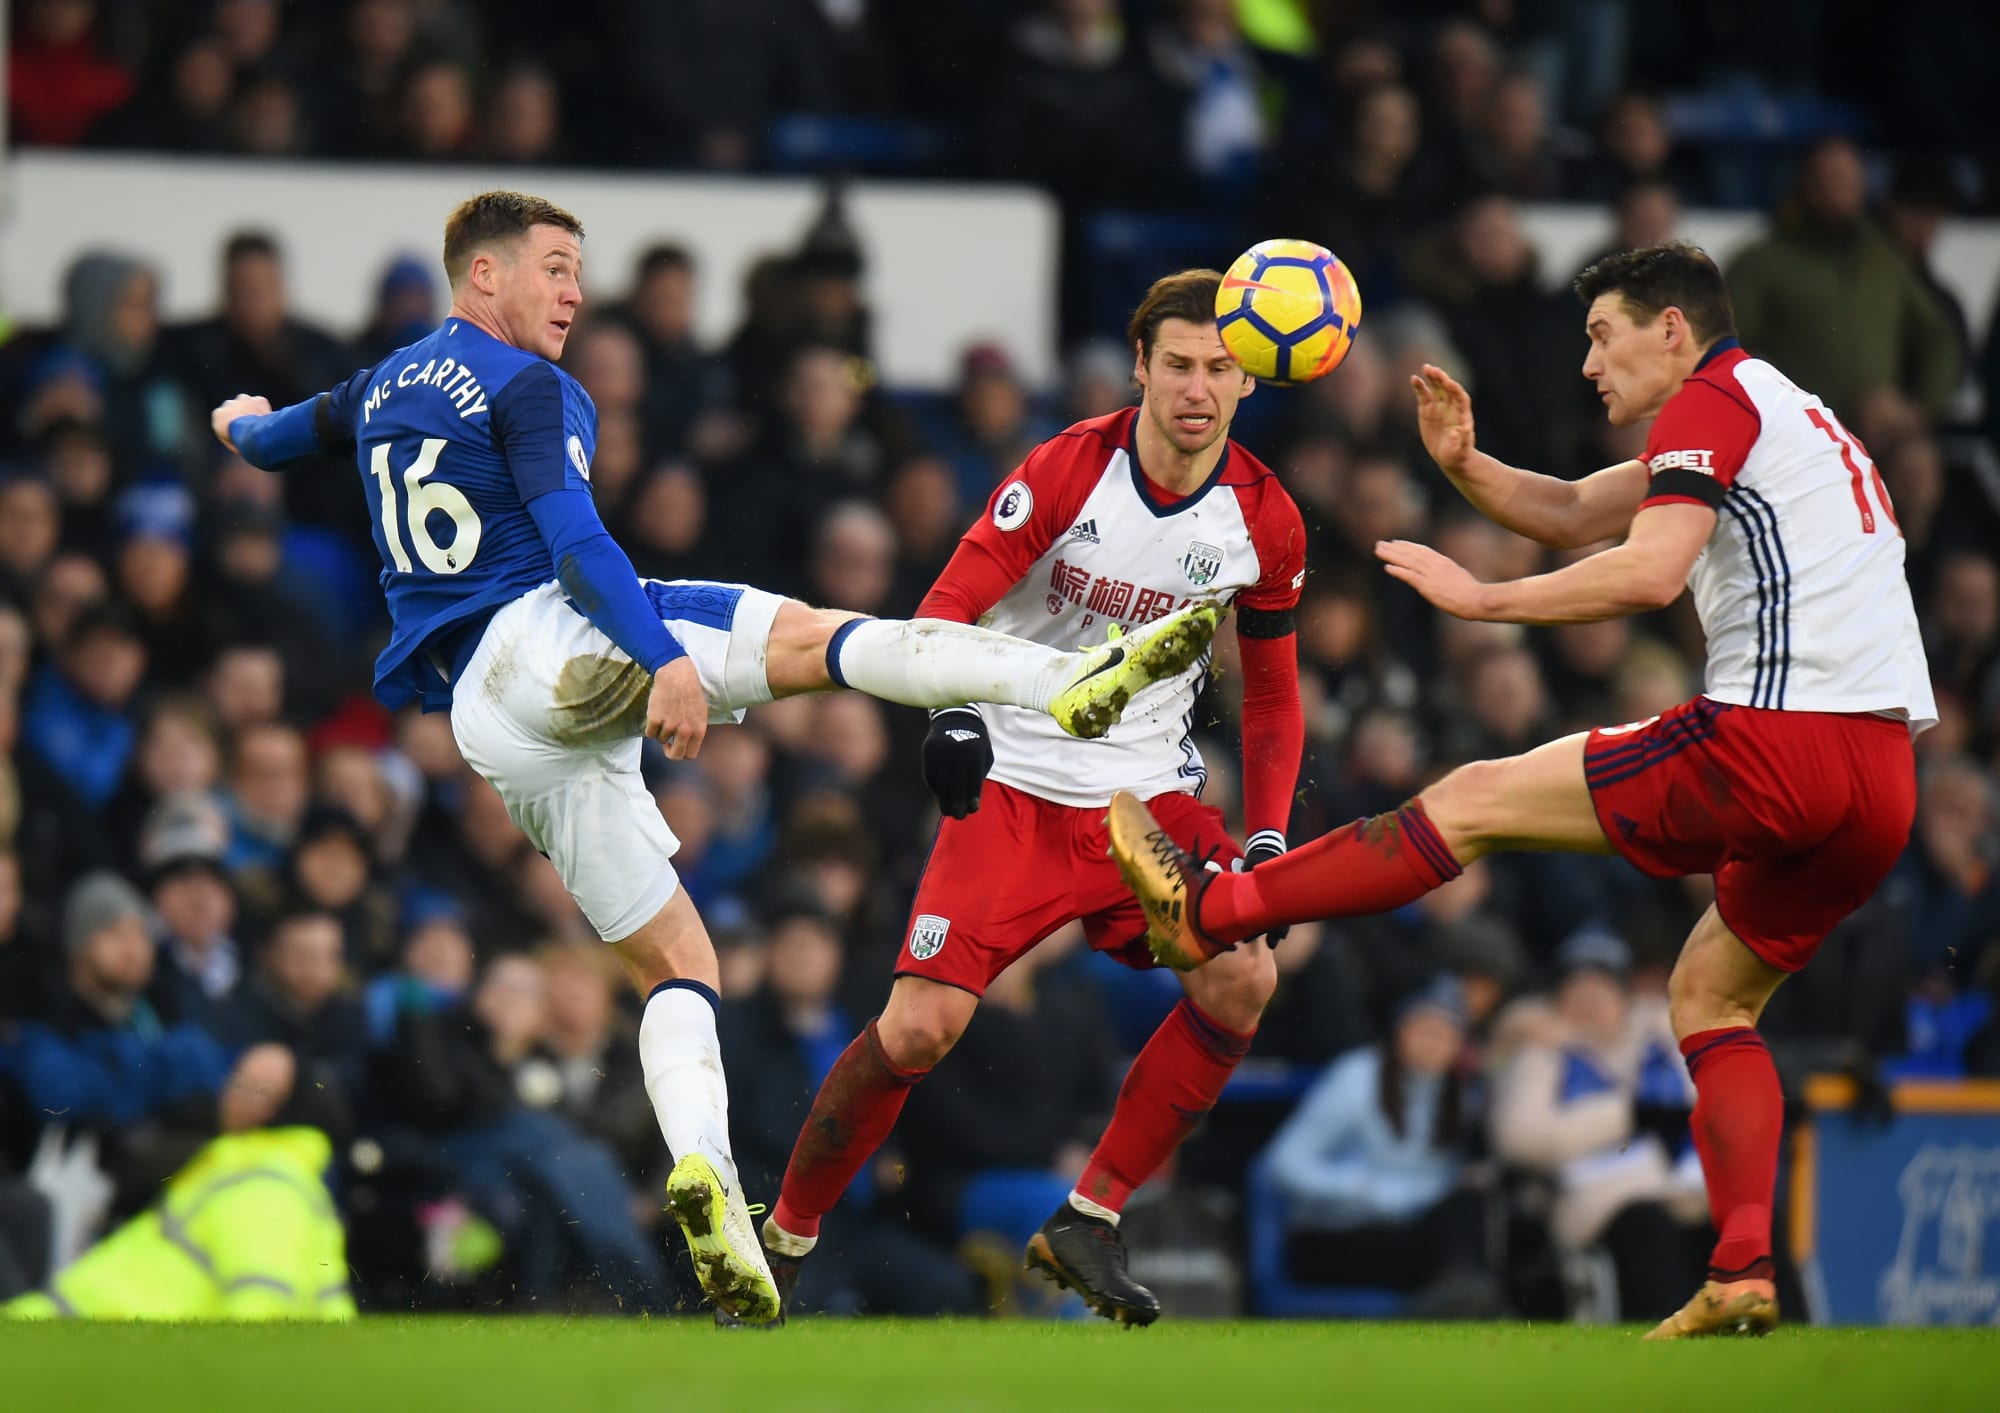 Match review: Everton lucky to get a point against West Brom